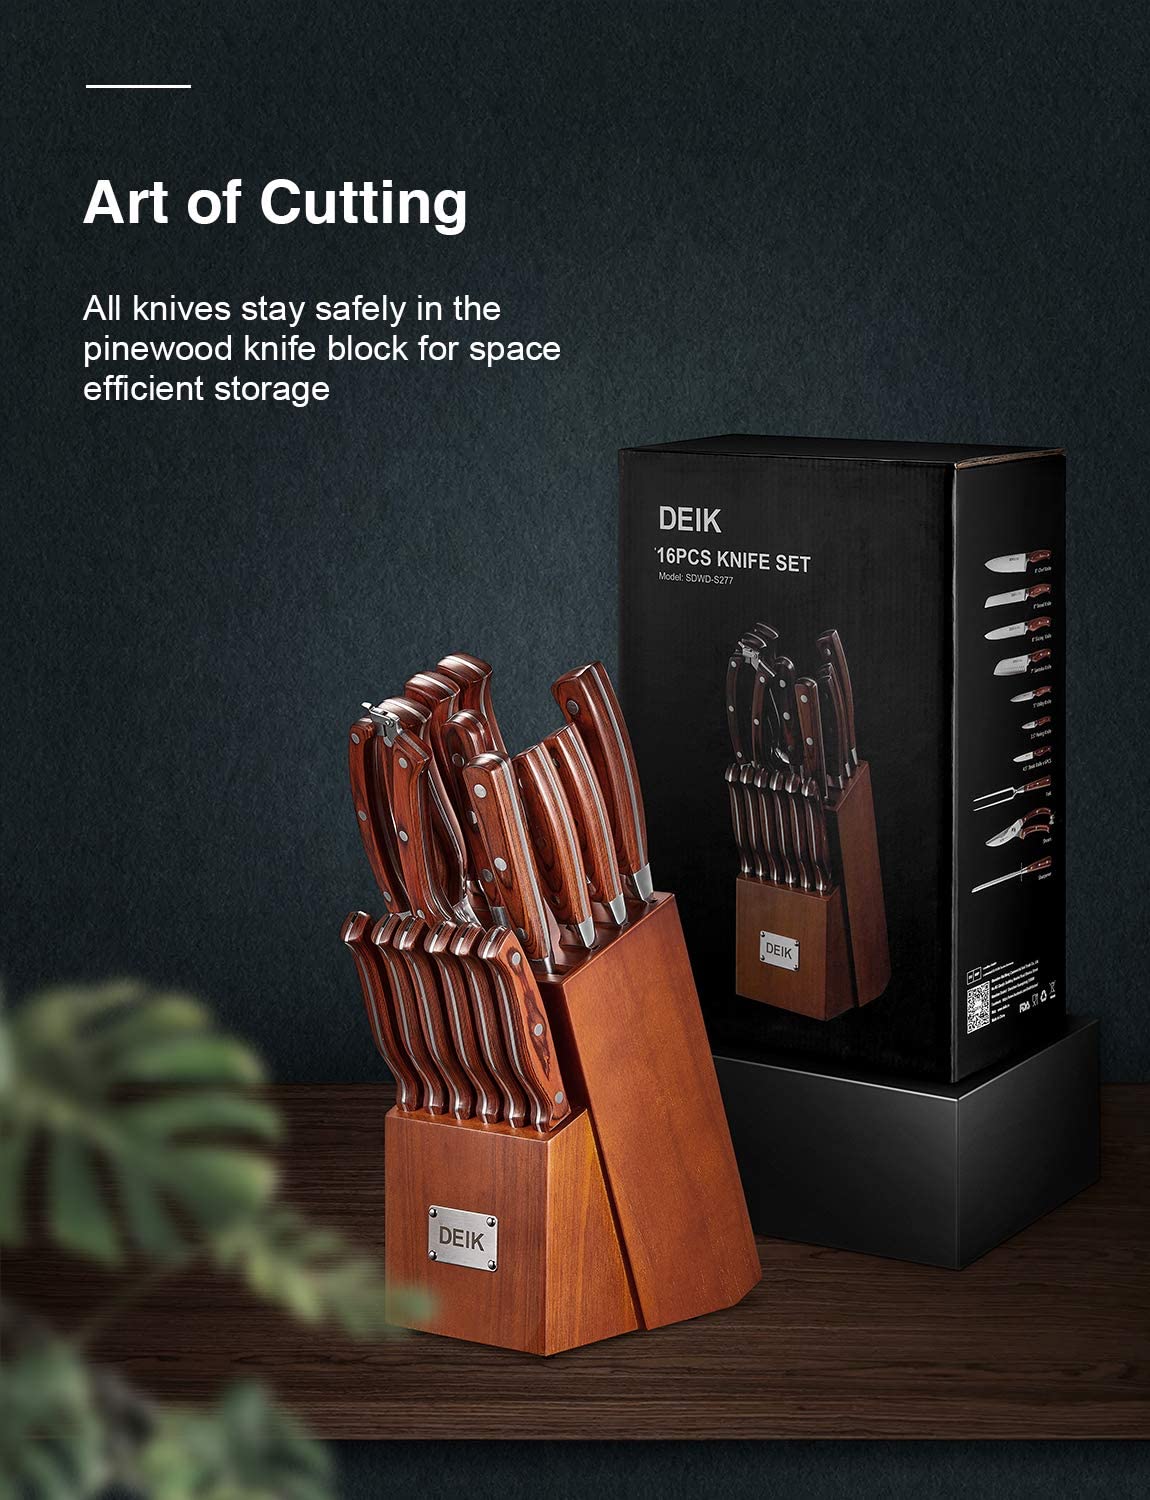 Deik | Knife Set, High Carbon Stainless Steel Kitchen Knife Set 16PCS, Super Sharp Cutlery Knife with Carving Fork and Serrated Steak Knives, Art Of Cutting